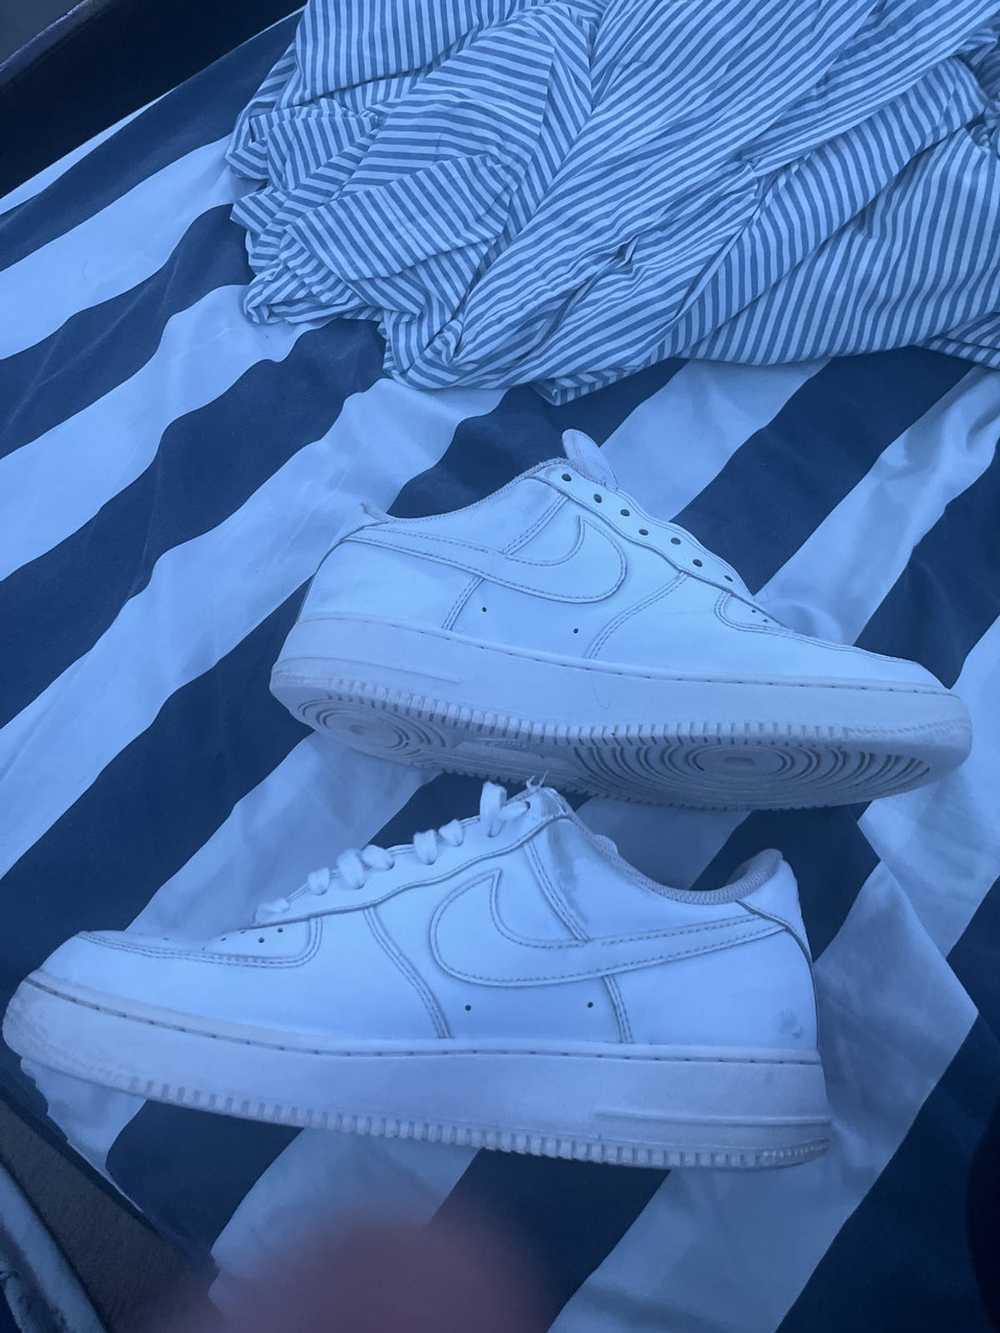 Nike Air Force 1 High Tops '82 White Size 5.5 - $60 (33% Off Retail) - From  Caroline